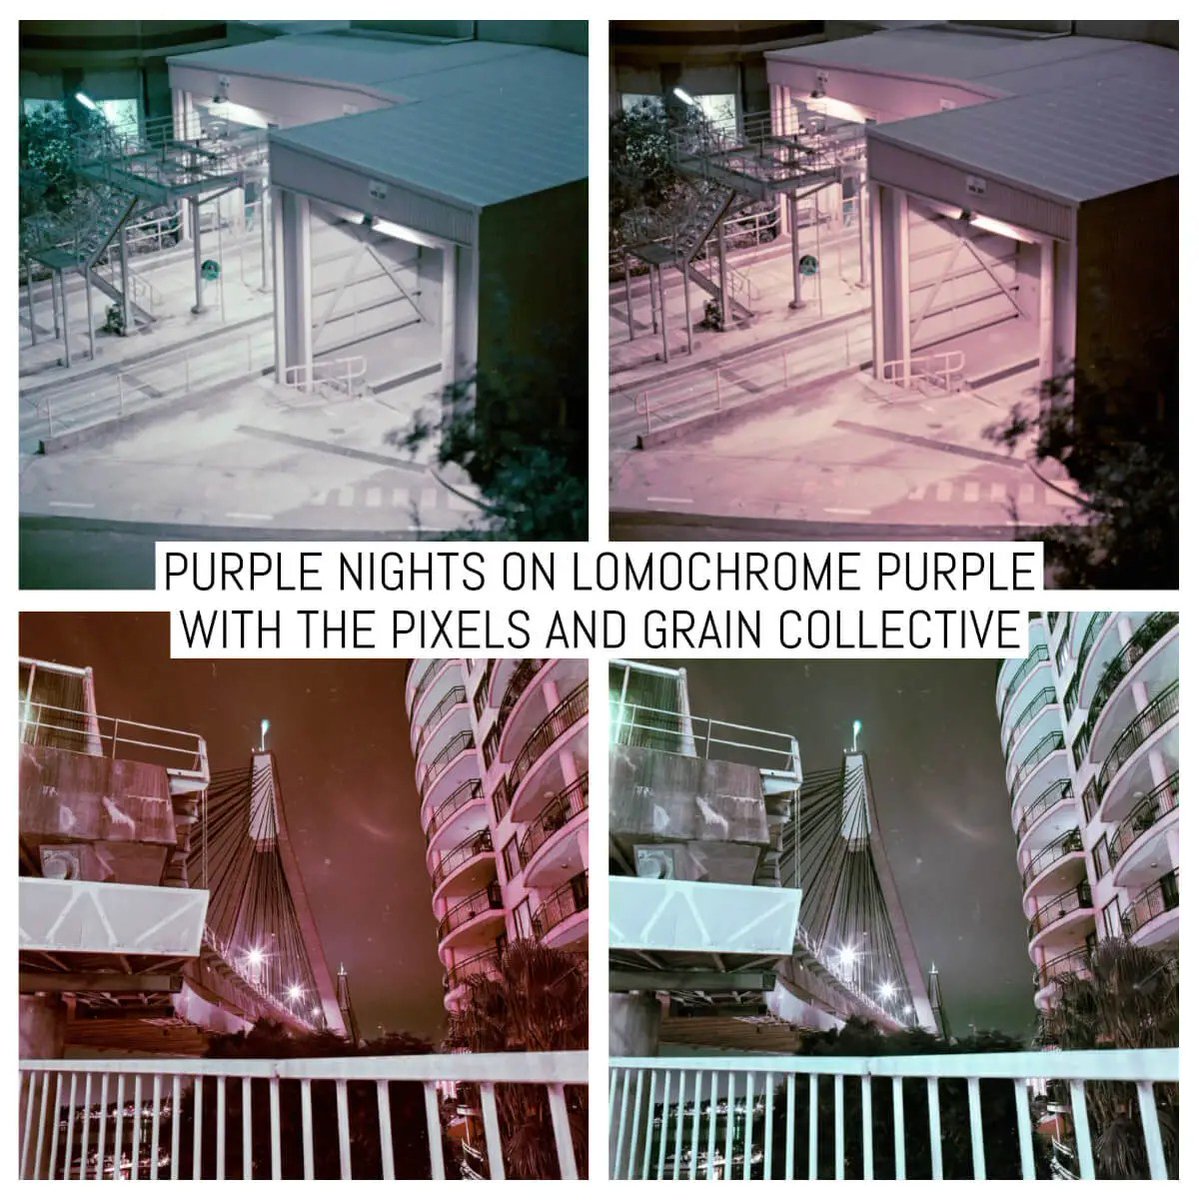 Purple nights on Lomochrome Purple with the Pixels and Grain Collective - by the Pixels and Grain Photography Collective

Read on at: emulsive.org/reviews/film-r…

#shootfilmbenice, #filmphotography, #believeinfilm @lomography